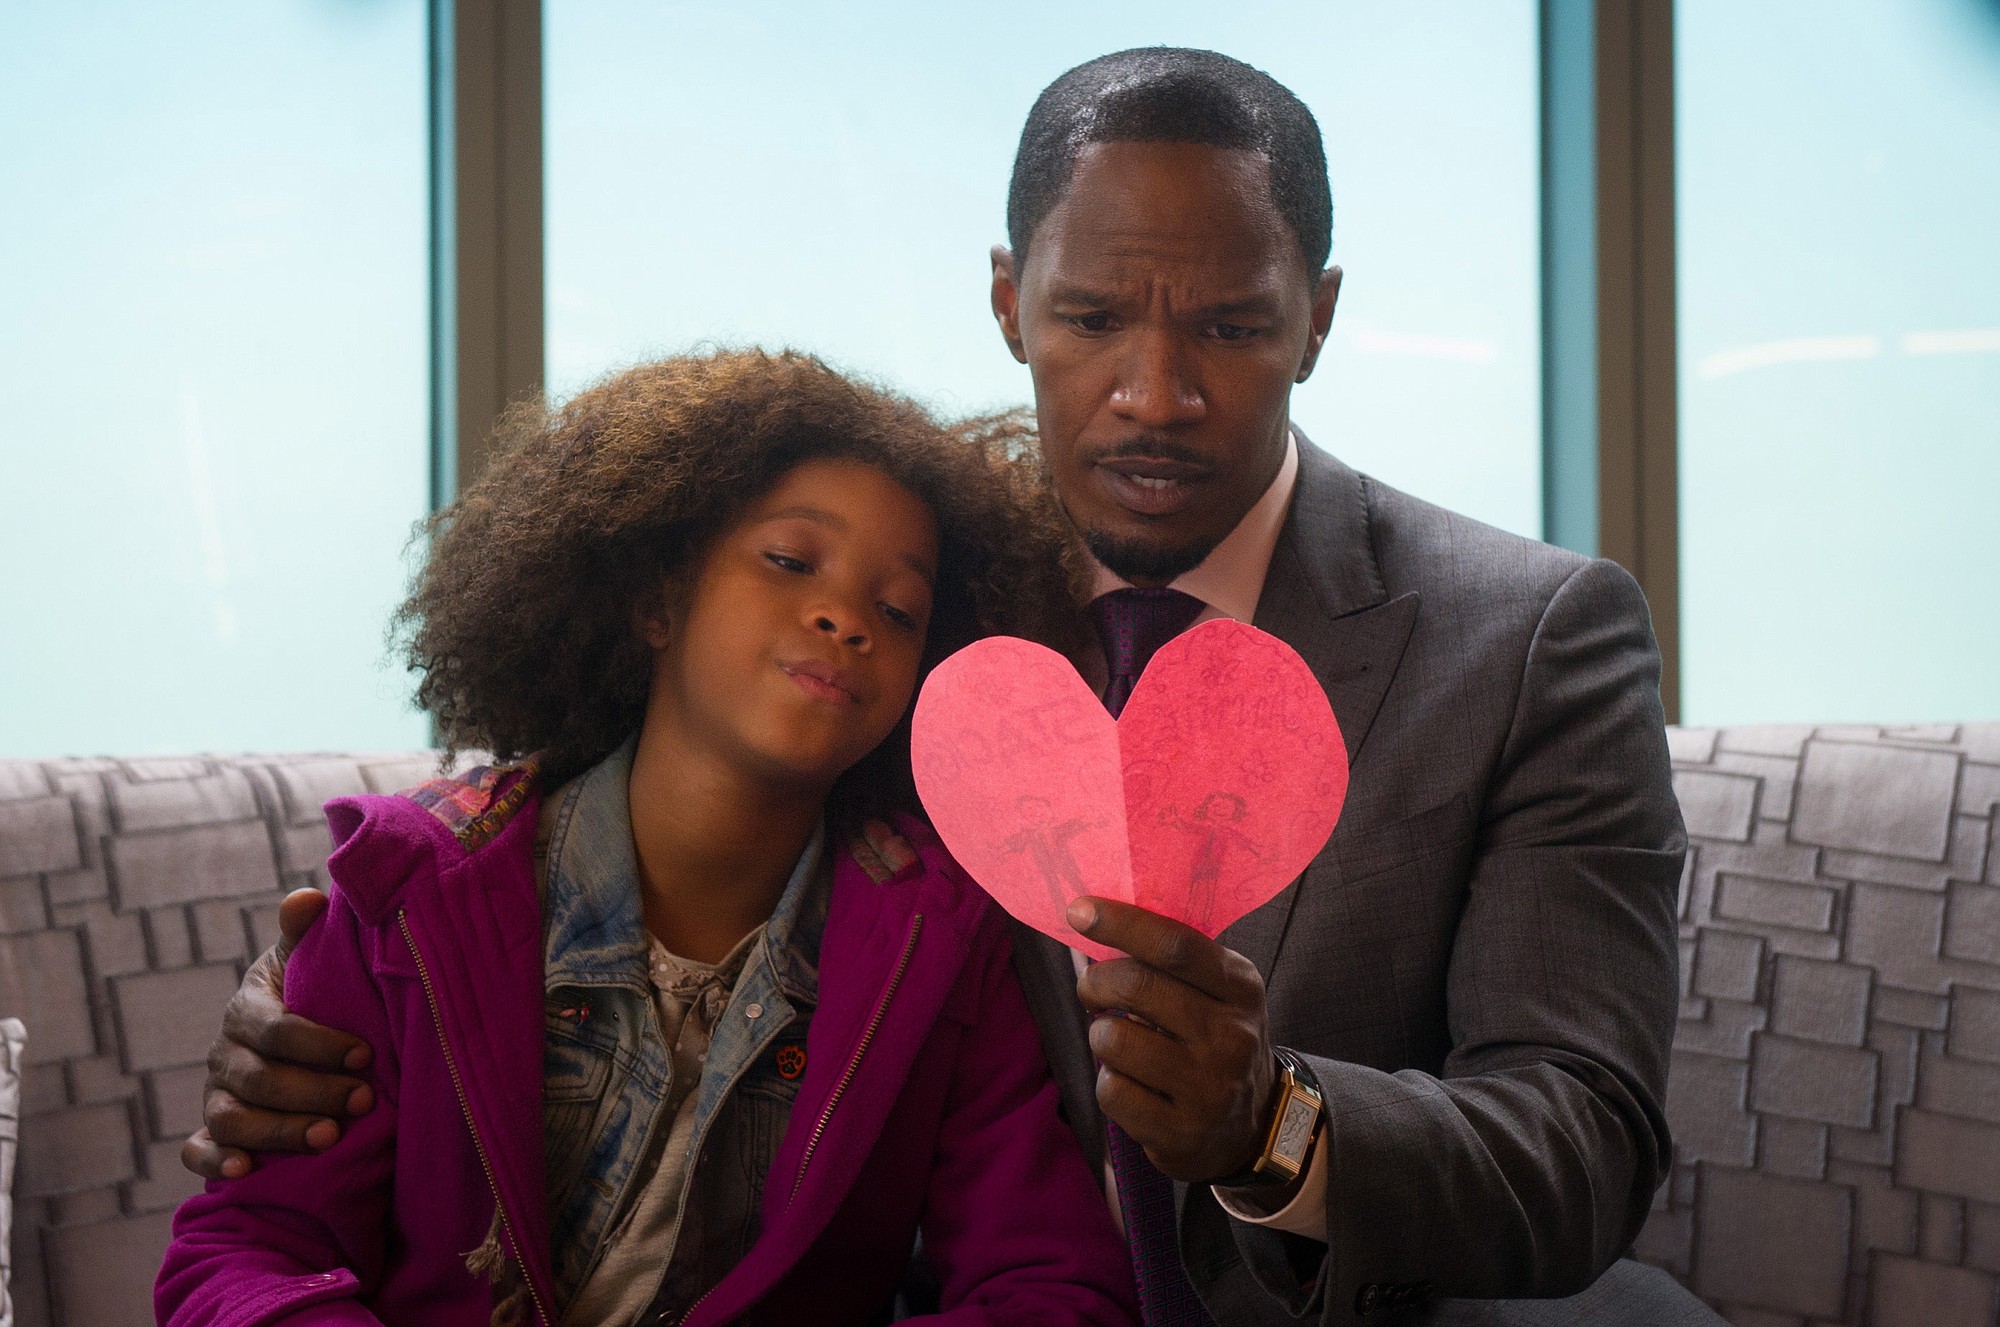 Quvenzhane Wallis and Jamie Foxx look at a card she made in a scene from &quot;Annie.&quot;
Barry Wetcher
Colombia Pictures-Sony